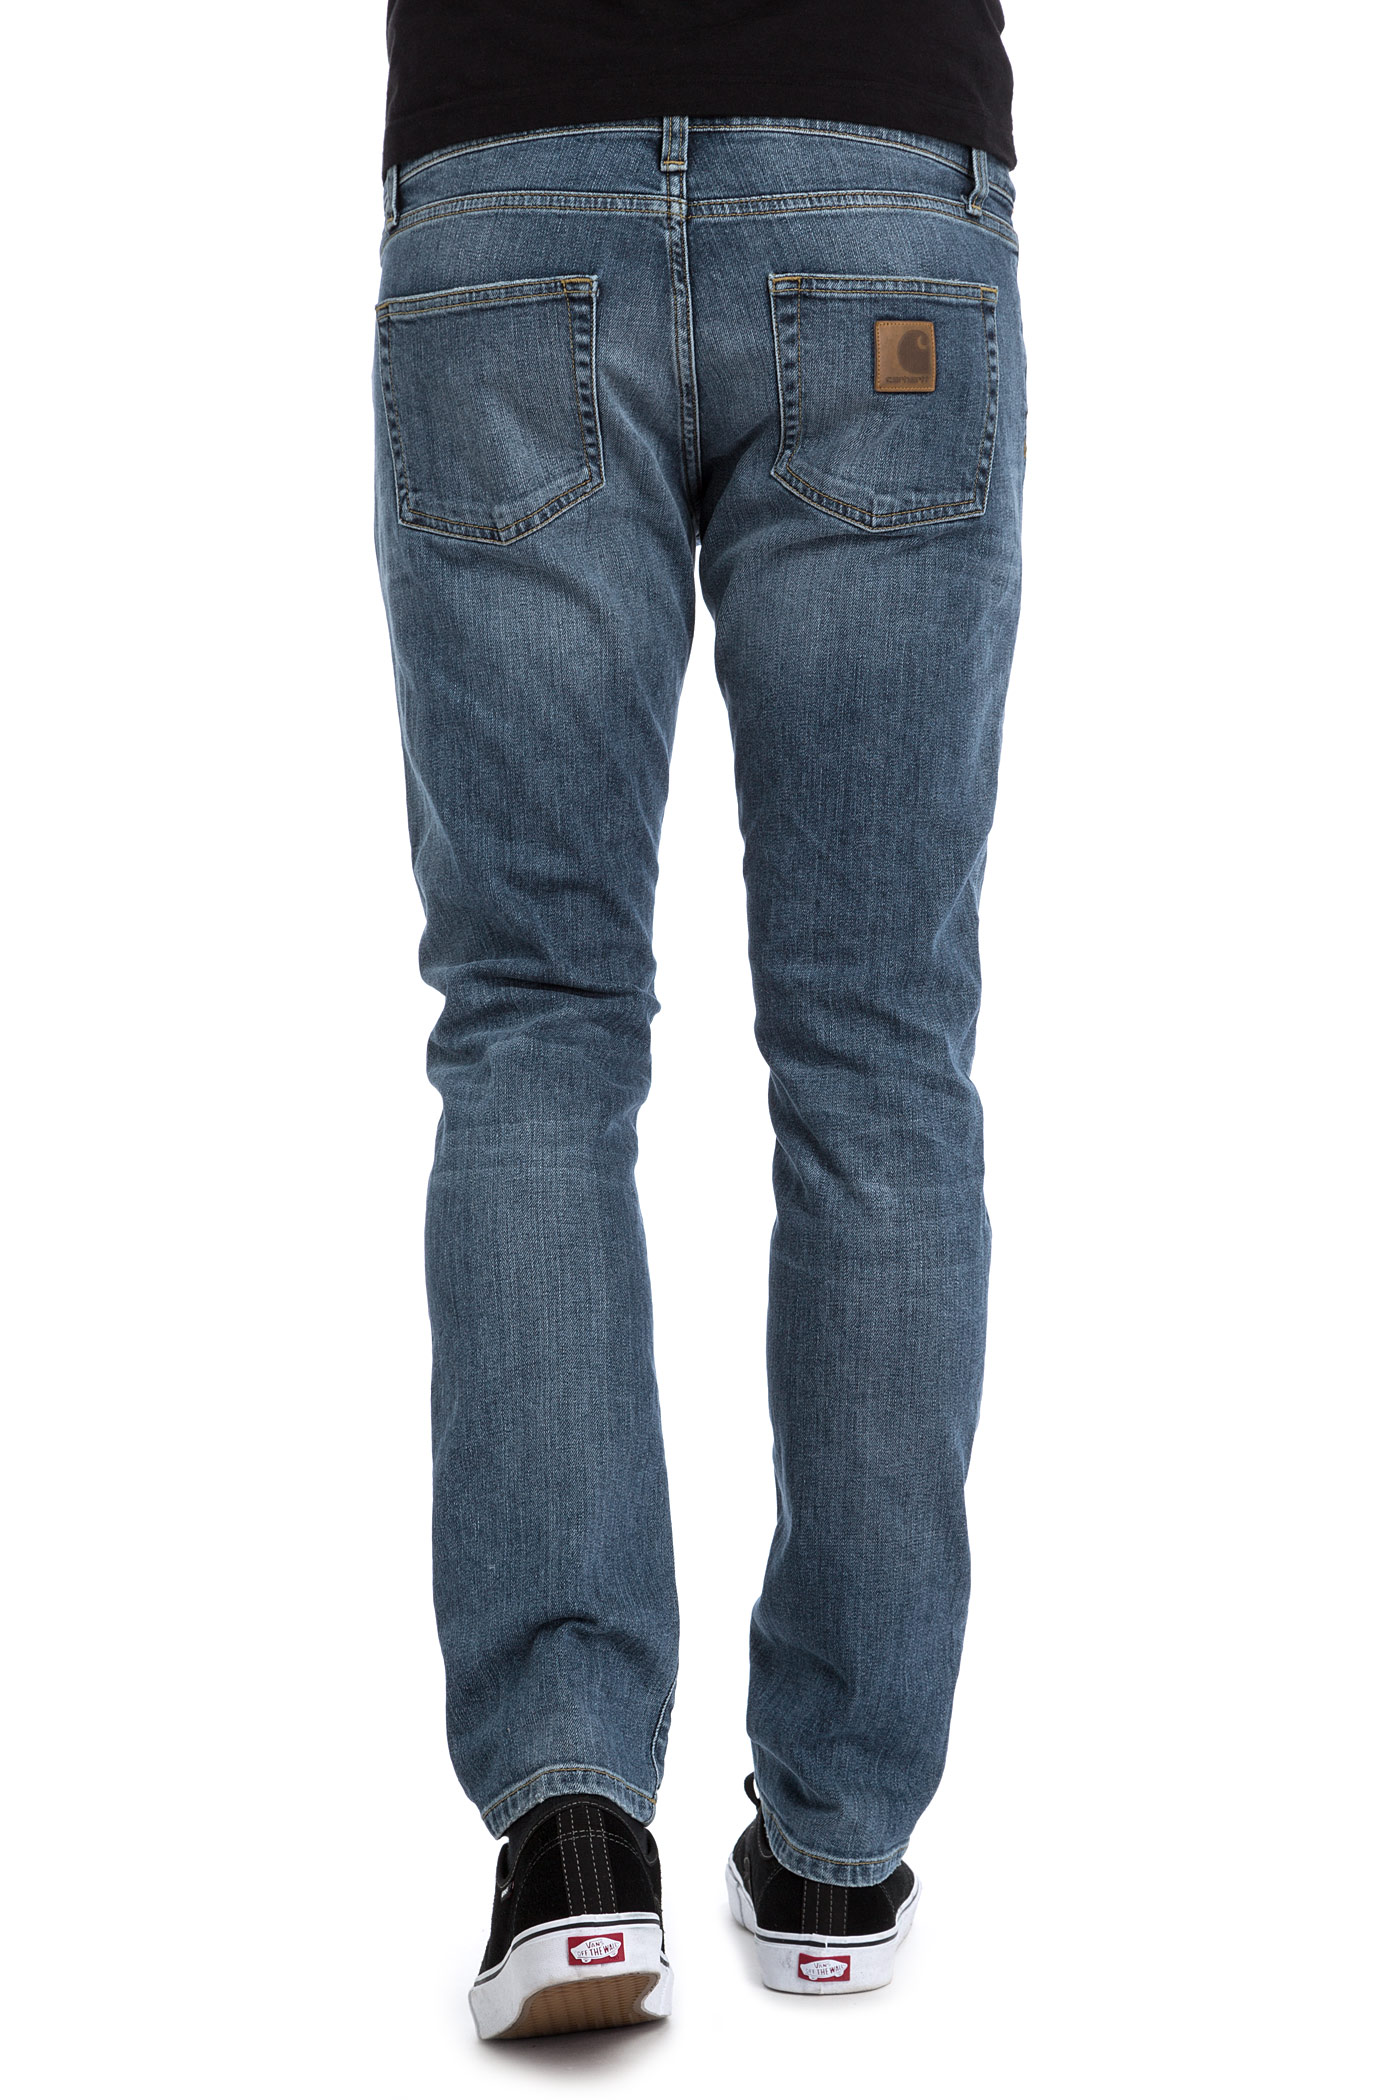 Carhartt WIP Rebel Pant Spicer Jeans (blue rope washed) buy at skatedeluxe